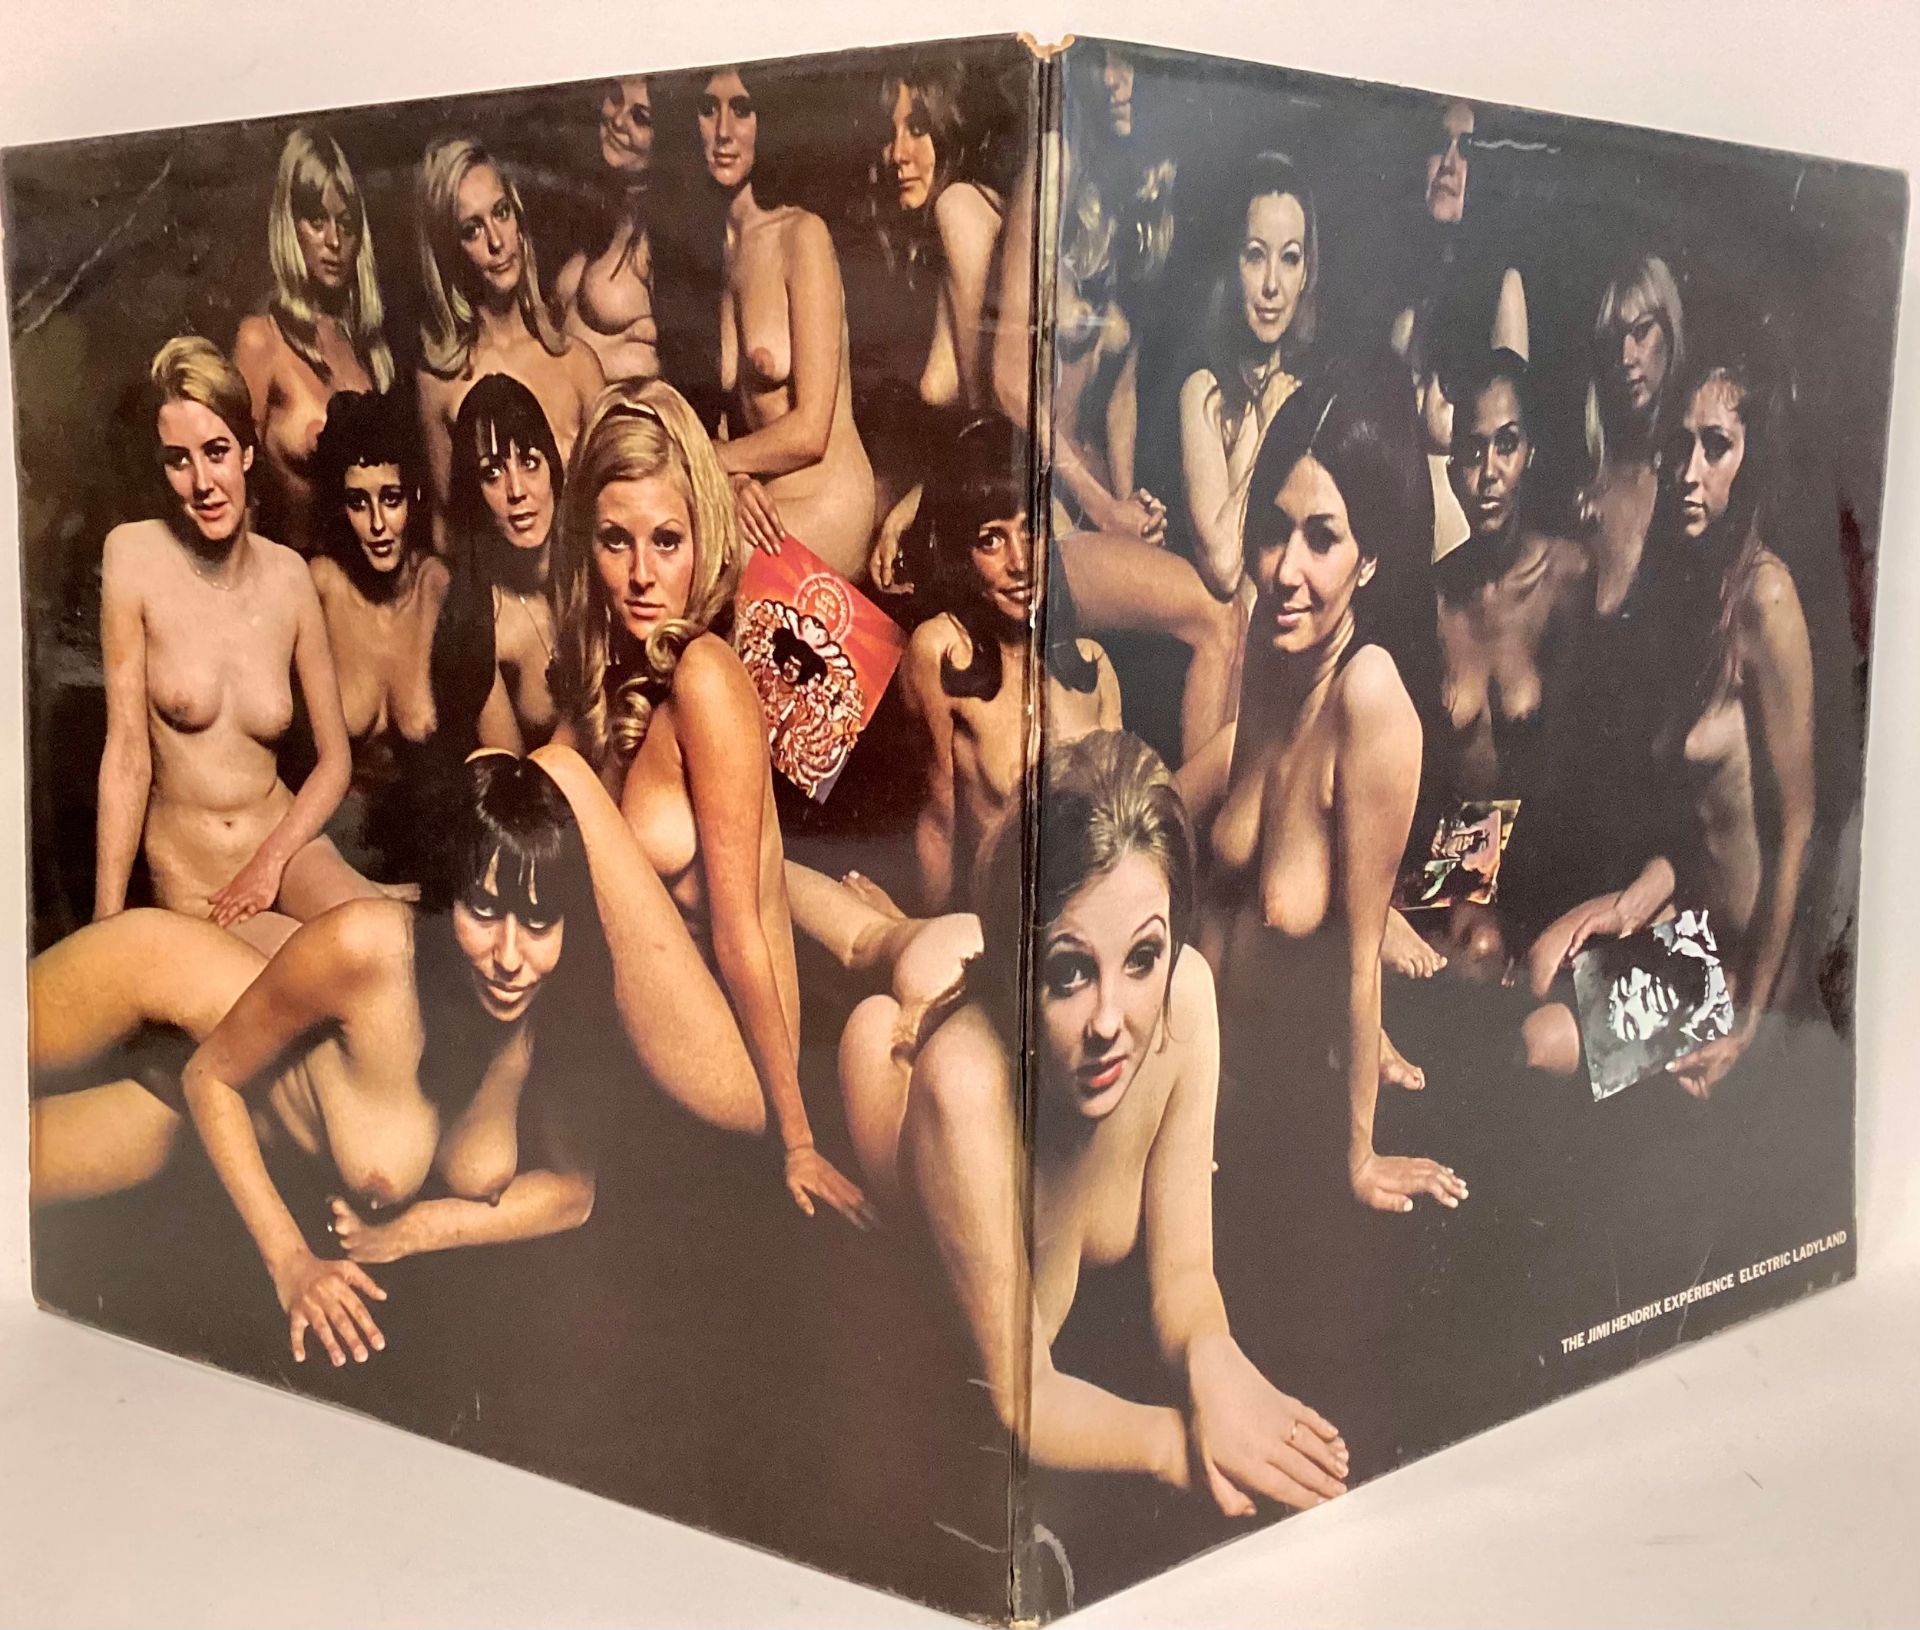 JIMI HENDRIX VINL LP RECORD ‘ELECTRIC LADYLAND’ WITH FULLY LAMINATED SLEEVE. Found here on The Track